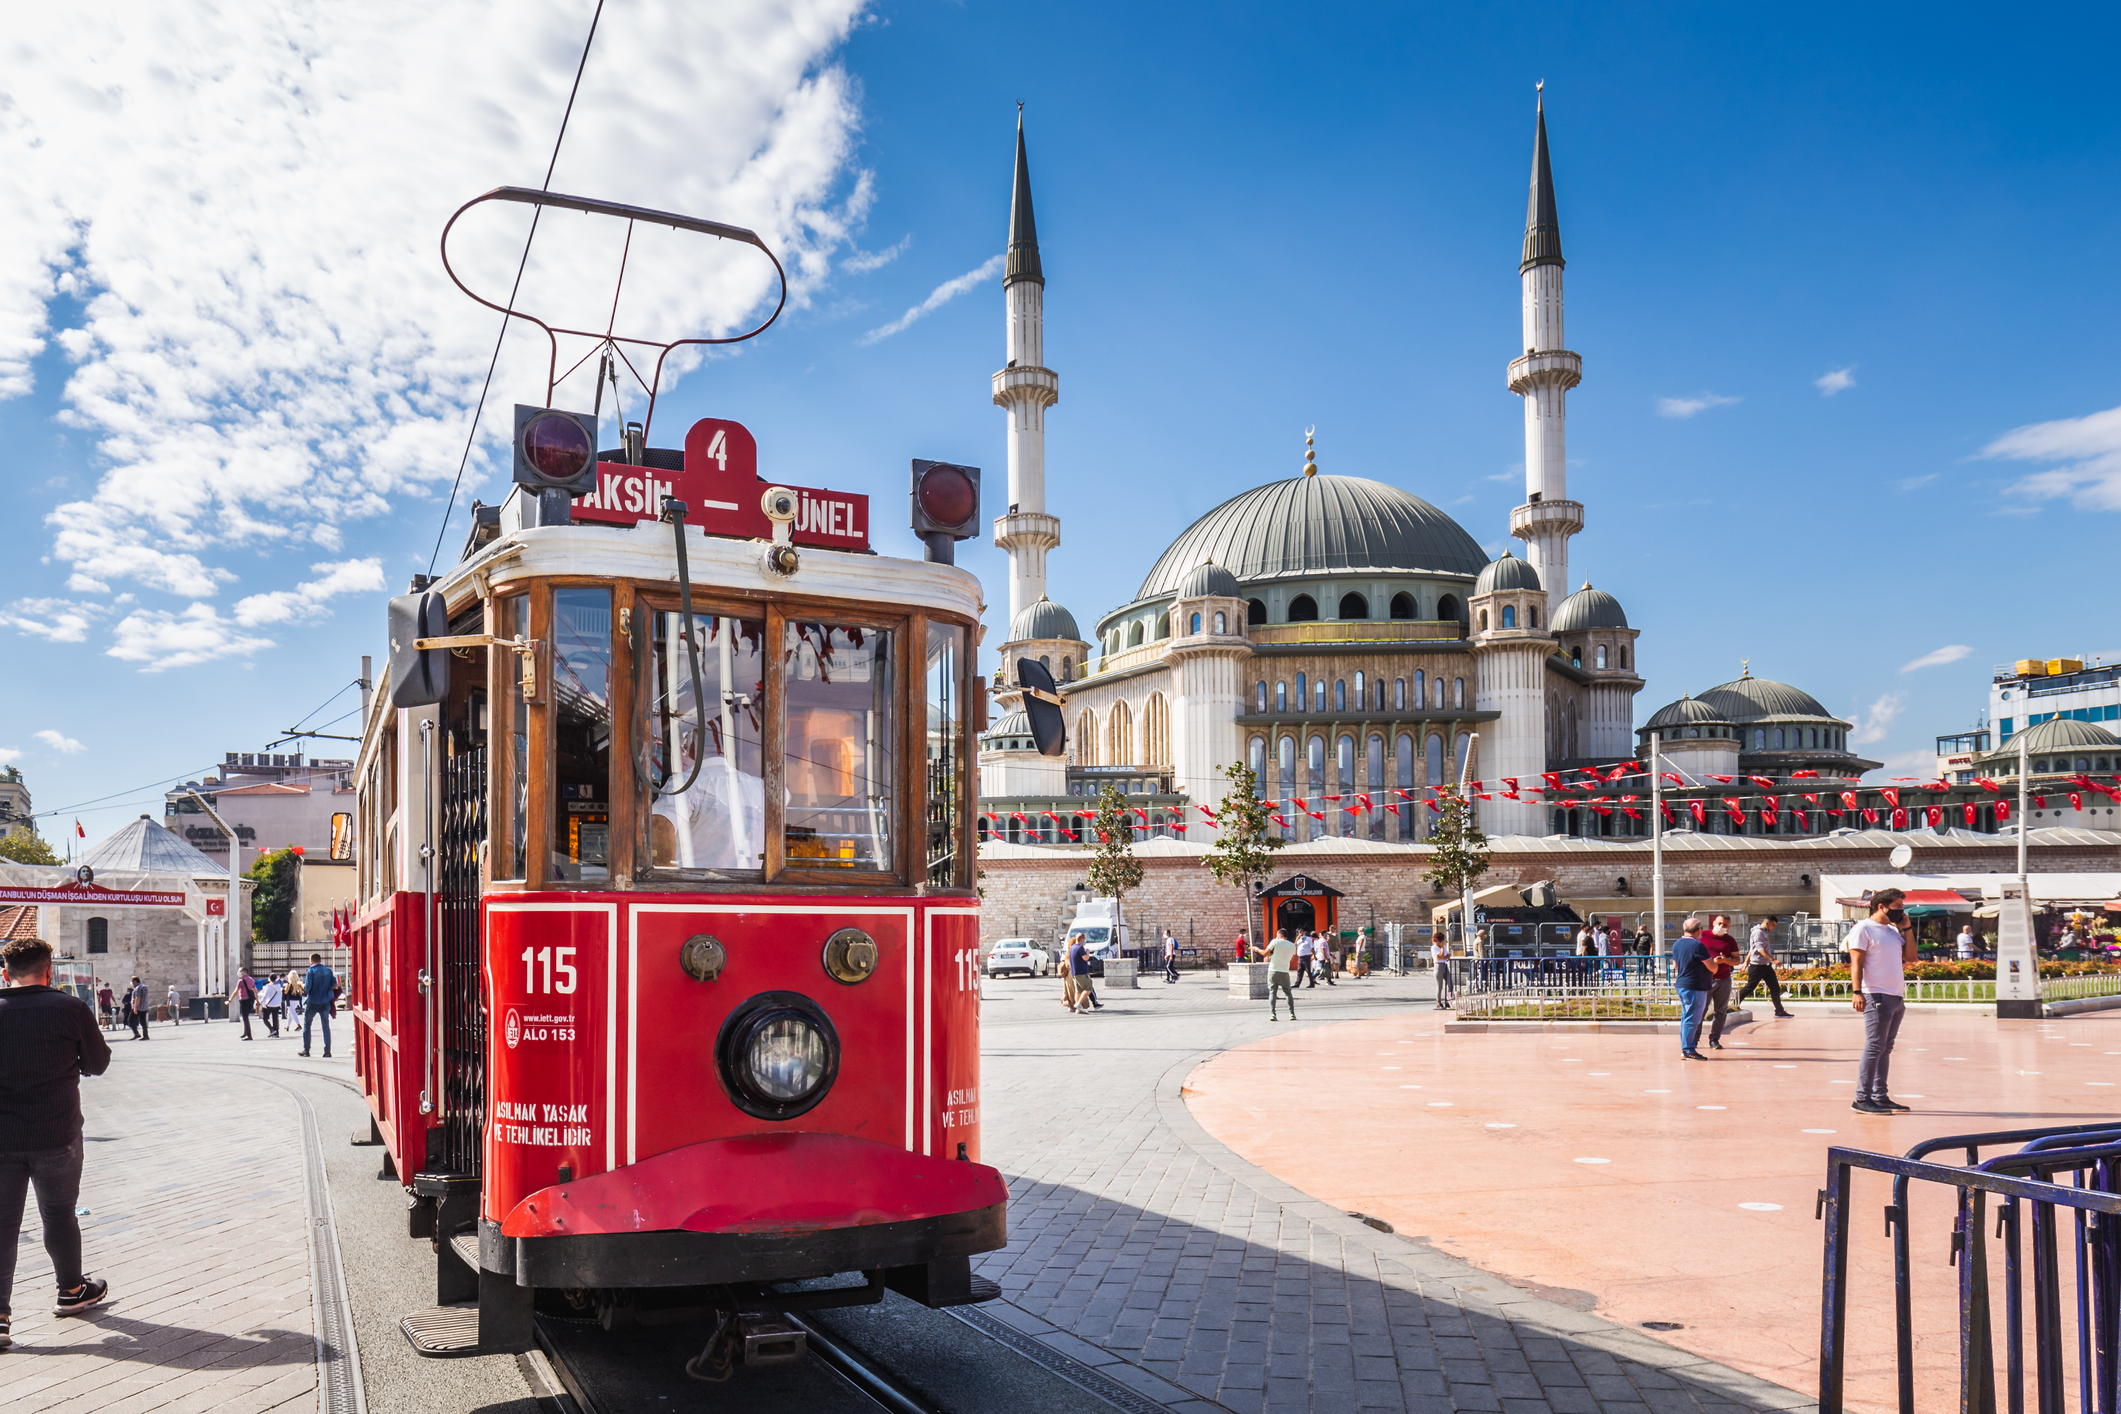 Explore Istanbul on a budget by using the tram to get around (photo: RuslanKaln, iStock license)